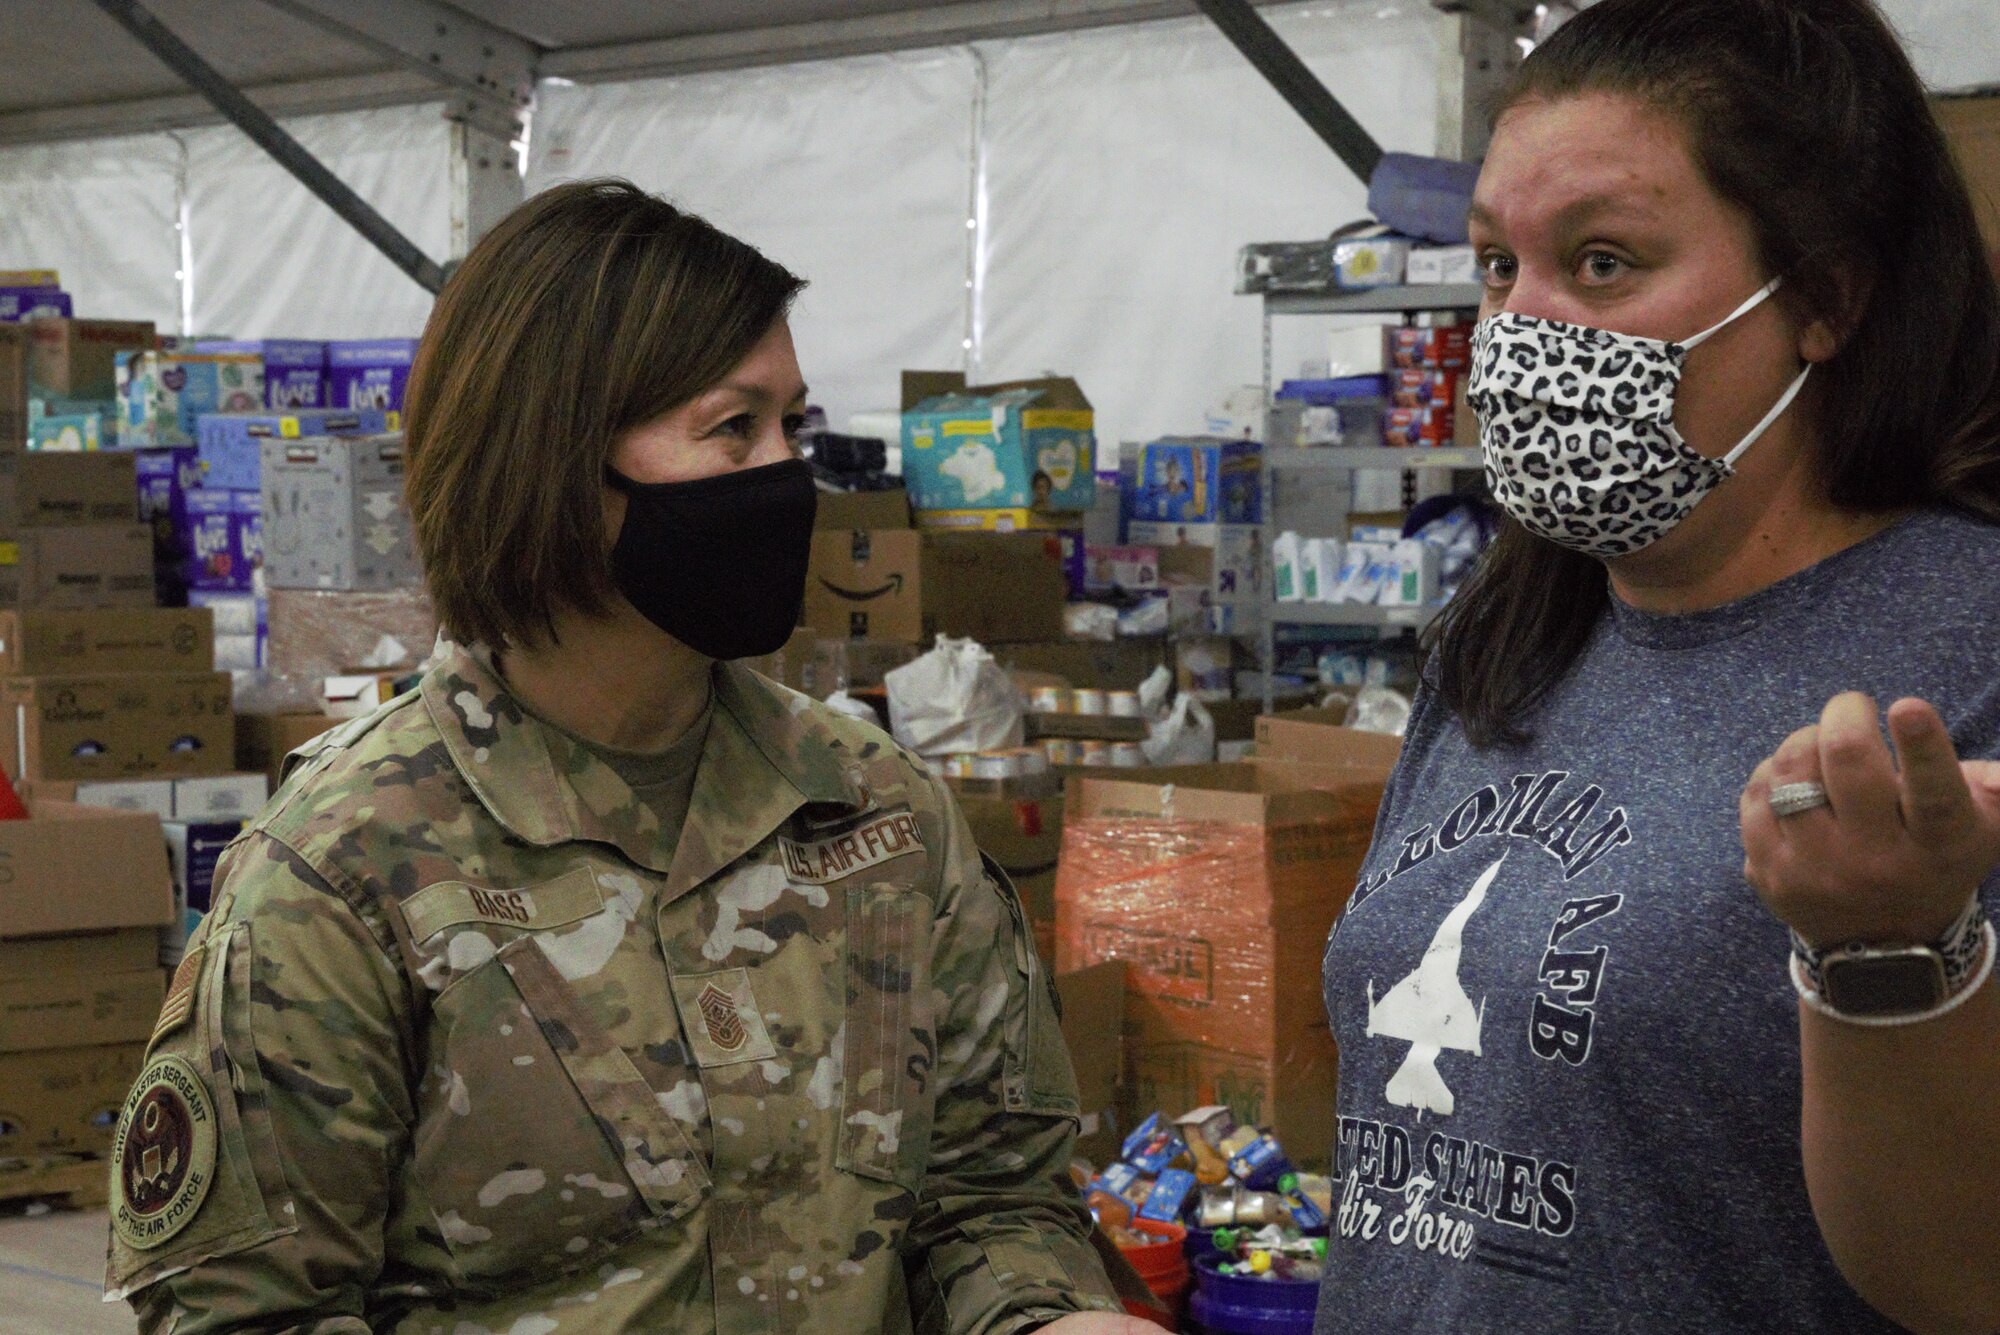 Chief Master Sgt. of the Air Force JoAnne S. Bass speaks to Jessica Manco, a member of the Holloman Spouses Organization and lead donations supervisor, about the donations center at Aman Omid Village as part of a visit to Holloman Air Force Base, New Mexico, Oct. 13, 2021. The Department of Defense, through U.S. Northern Command, and in support of the Department of State and Department of Homeland Security, is providing transportation, temporary housing, medical screening, and general support for at least 50,000 Afghan evacuees at suitable facilities, in permanent or temporary structures, as quickly as possible. This initiative provides Afghan evacuees essential support at secure locations outside Afghanistan. (U.S. Navy photo by Mass Communications Specialist 1st Class Sarah Rolin)